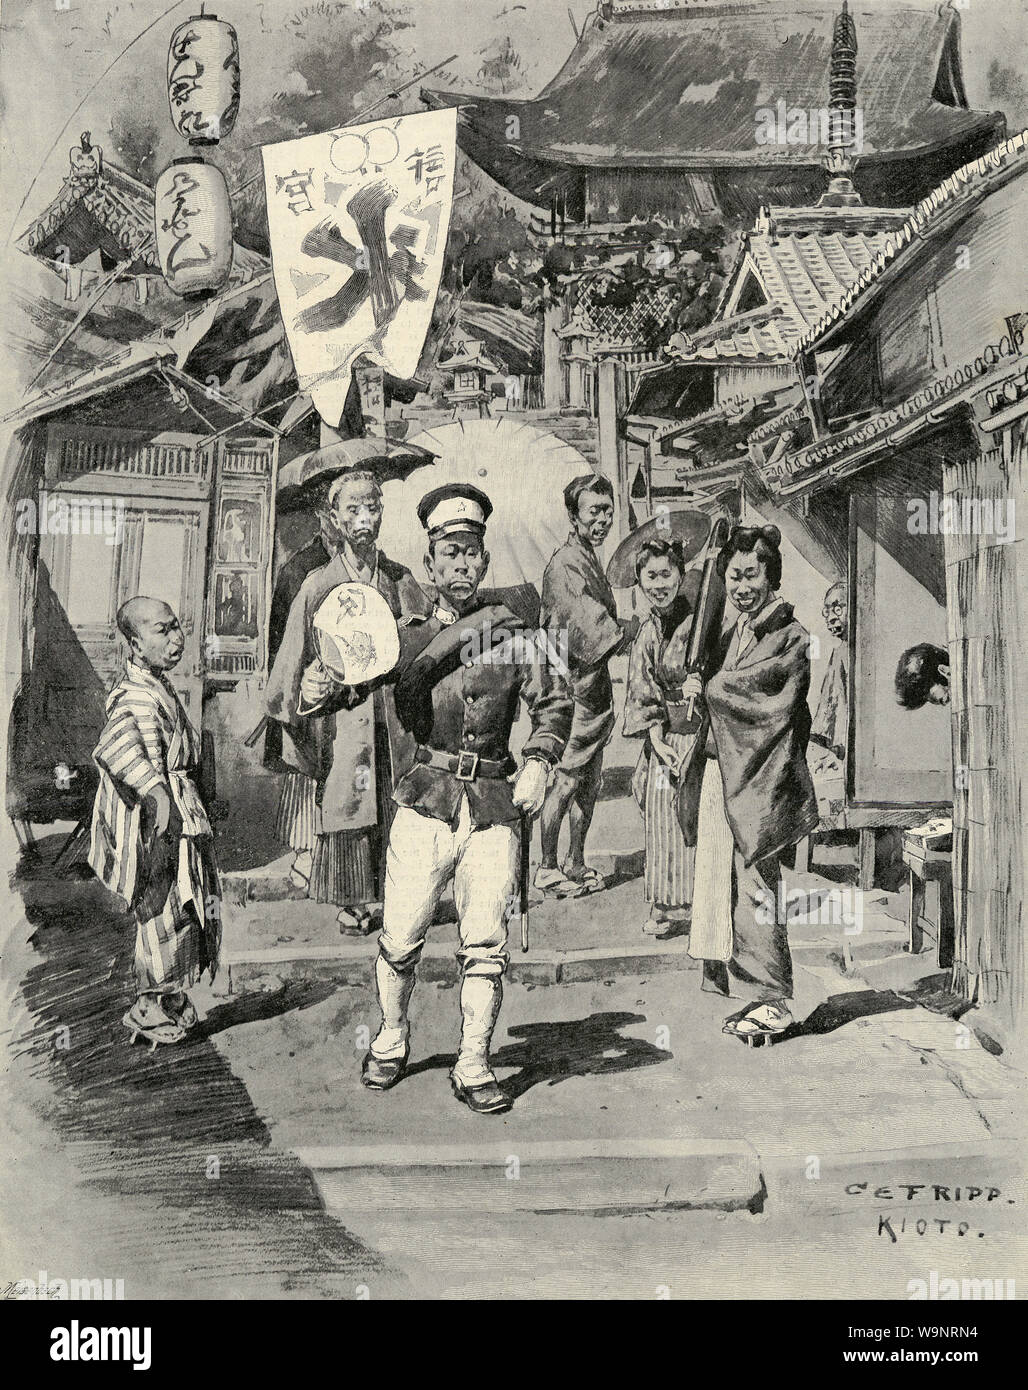 [ 1890s Japan - Sino–Japanese War (1894–1895) ] —   A Japanese soldier walks the streets of Kyoto during the First Sino-Japanese War (1894–1895).   Published in the British weekly illustrated newspaper The Graphic on November 30, 1895 (Meiji  28). Artwork by Canadian painter and illustrator Charles Edwin Fripp (1854-1906).  Original text: 'The sweets of victory: a street scene in Japan after the war.'  19th century vintage newspaper illustration. Stock Photo